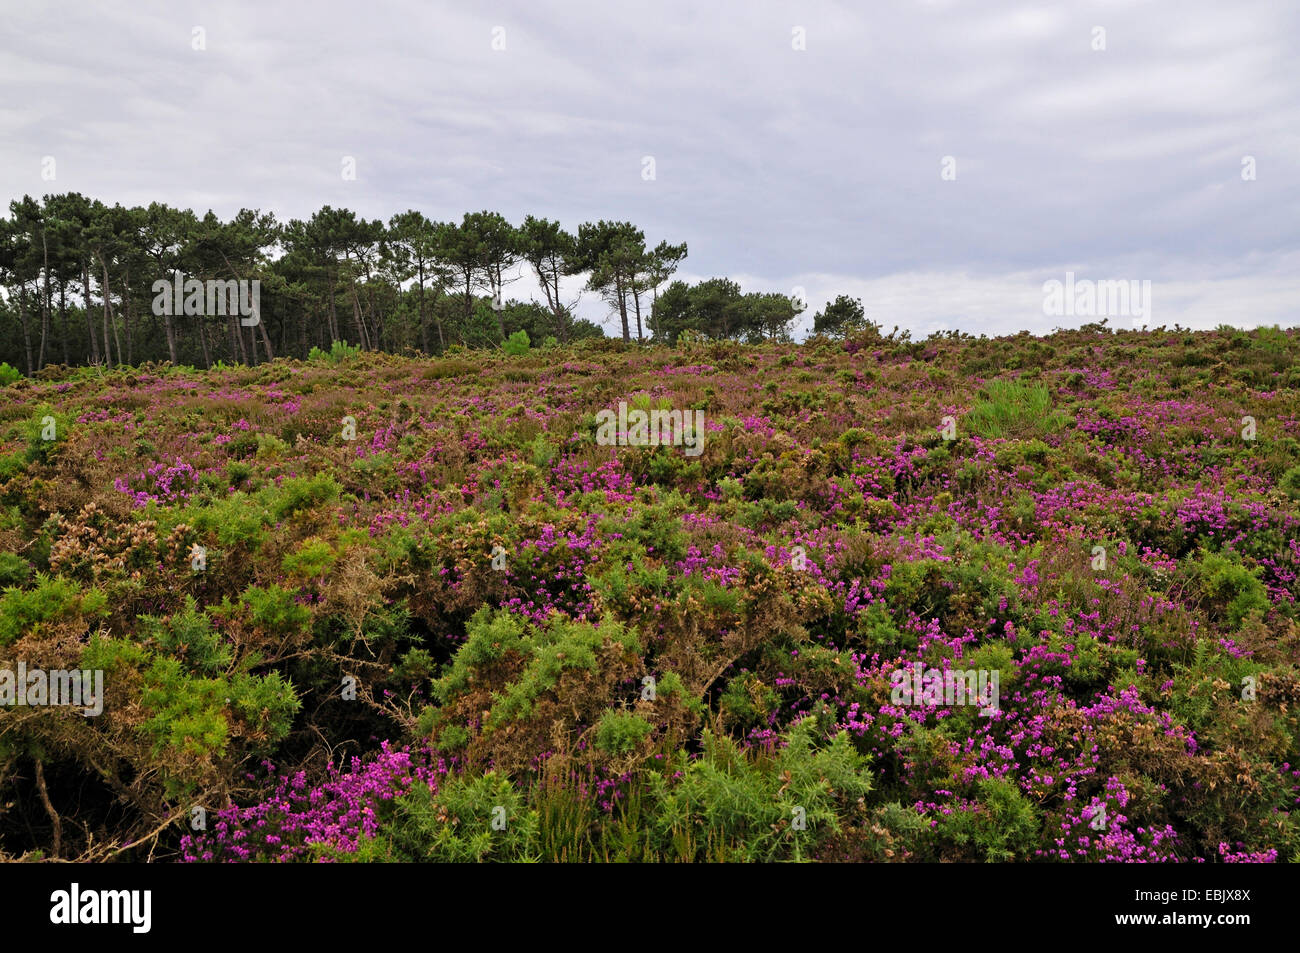 Blooming heath, Francia, Brittany Foto Stock